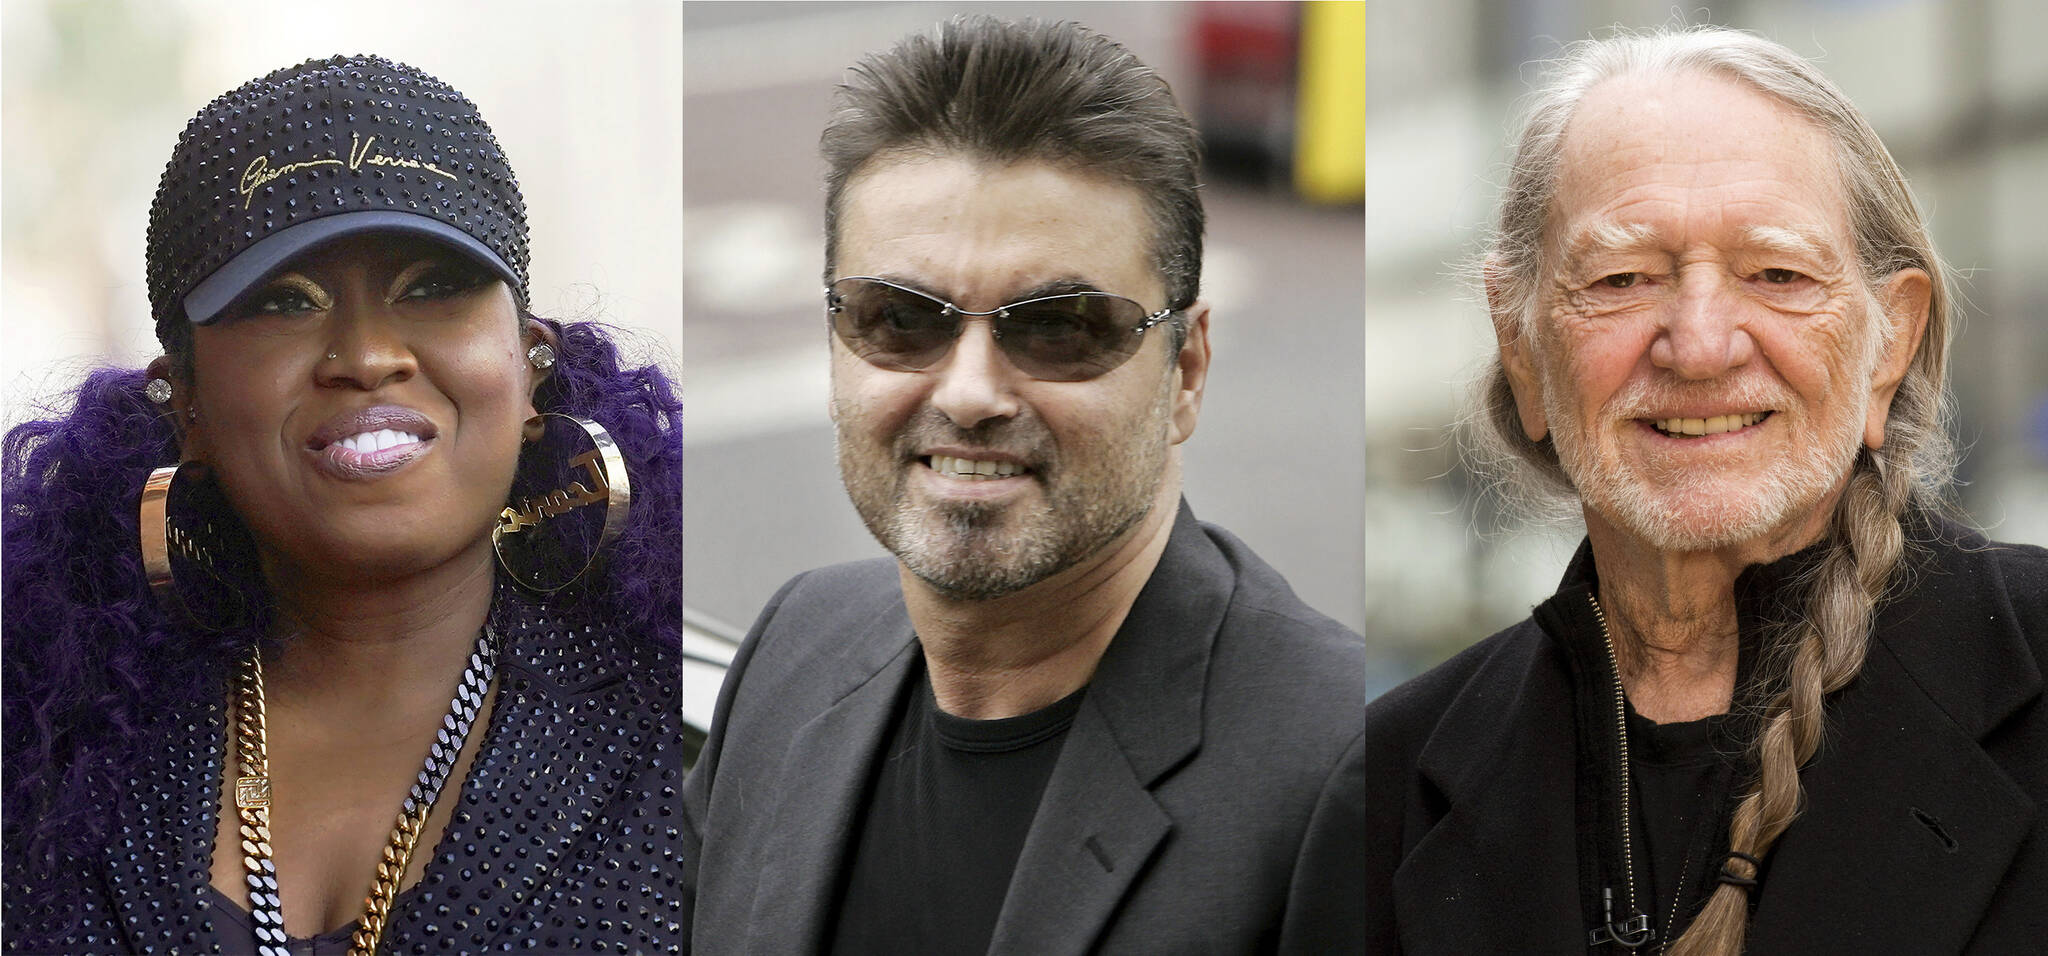 This combination of photos shows Missy Elliott, George Michael and Willie Nelson, who are among this year’s nominees for 2023 induction into the Rock & Roll Hall of Fame. (AP Photo)